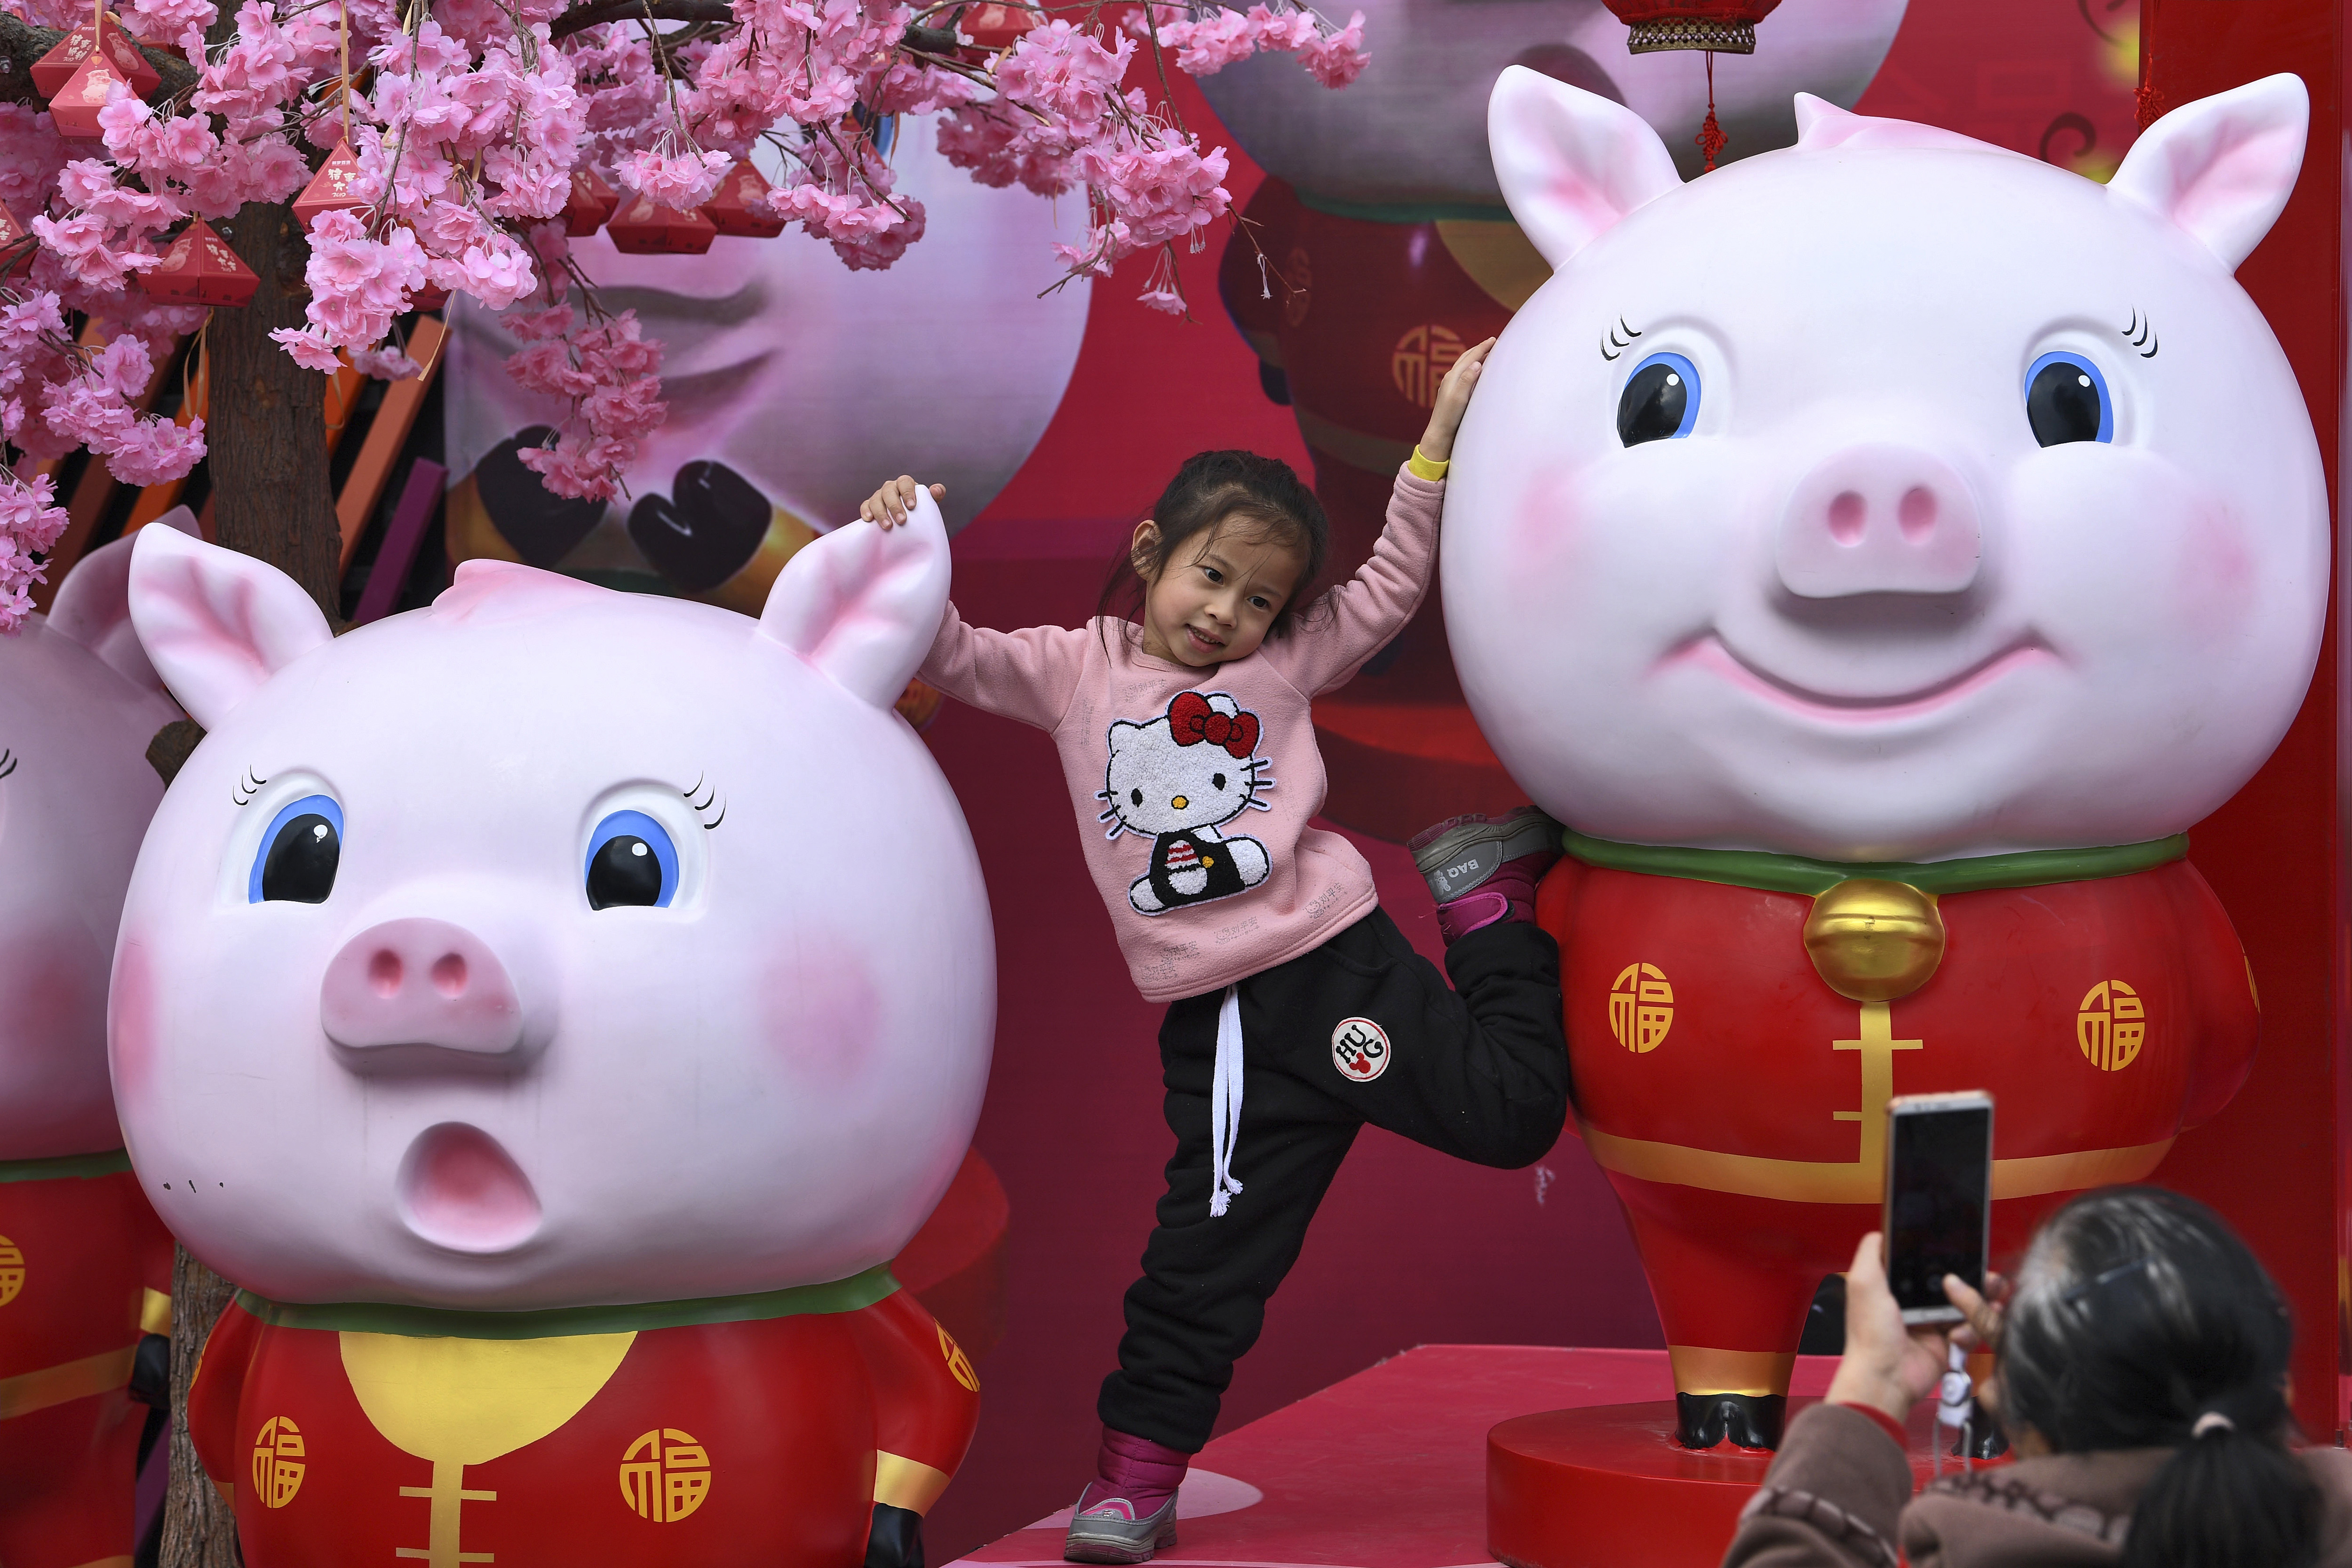 Chinese New Year, Feb. 5, a special non-working holiday